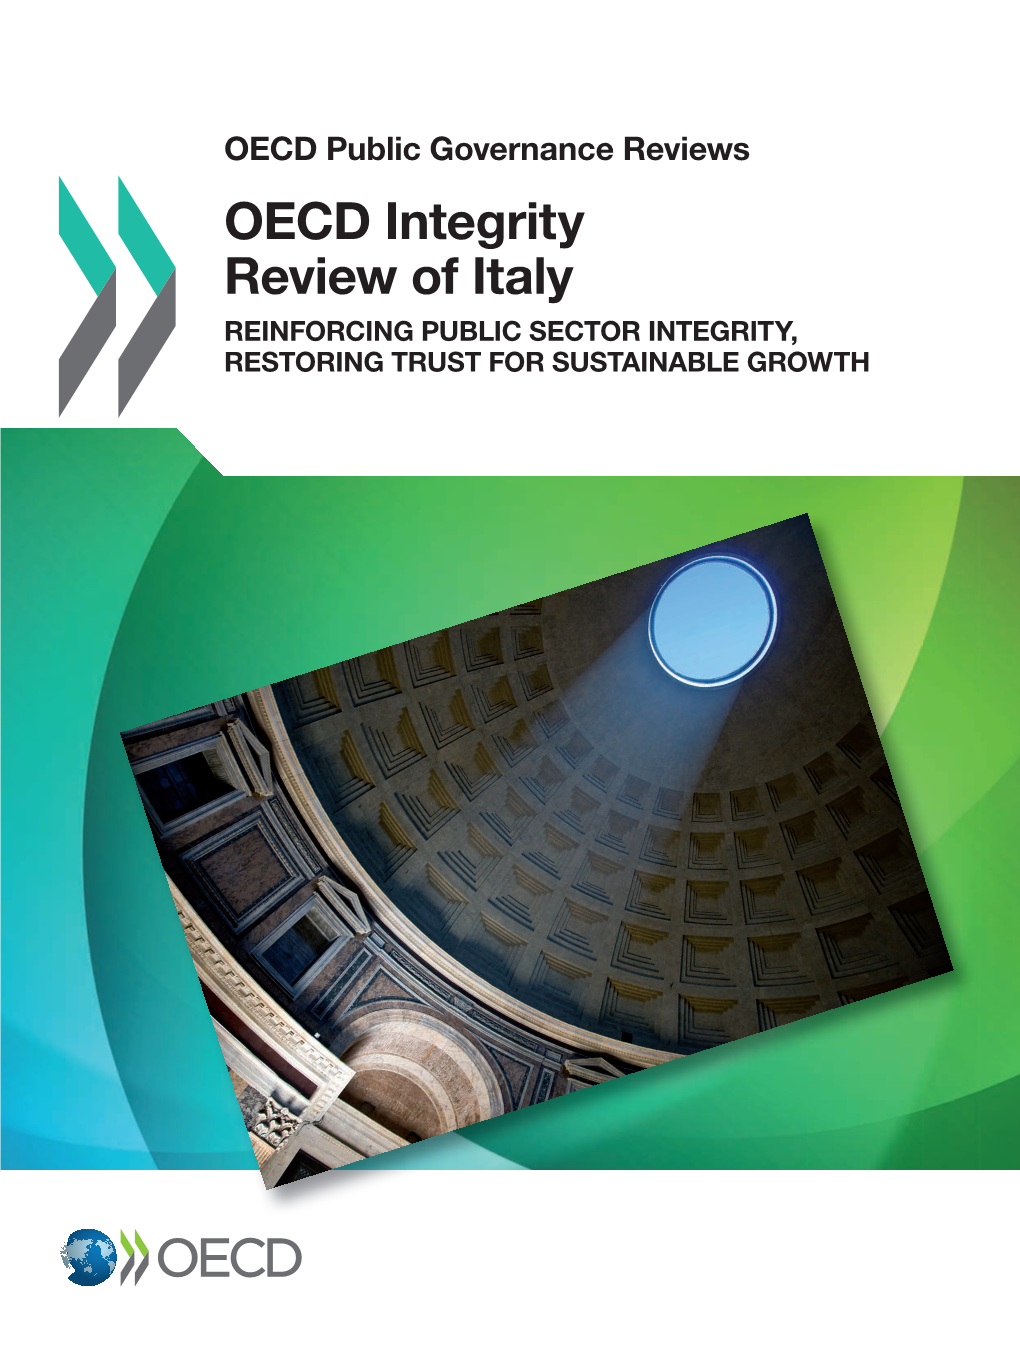 OECD Integrity Review of Italy